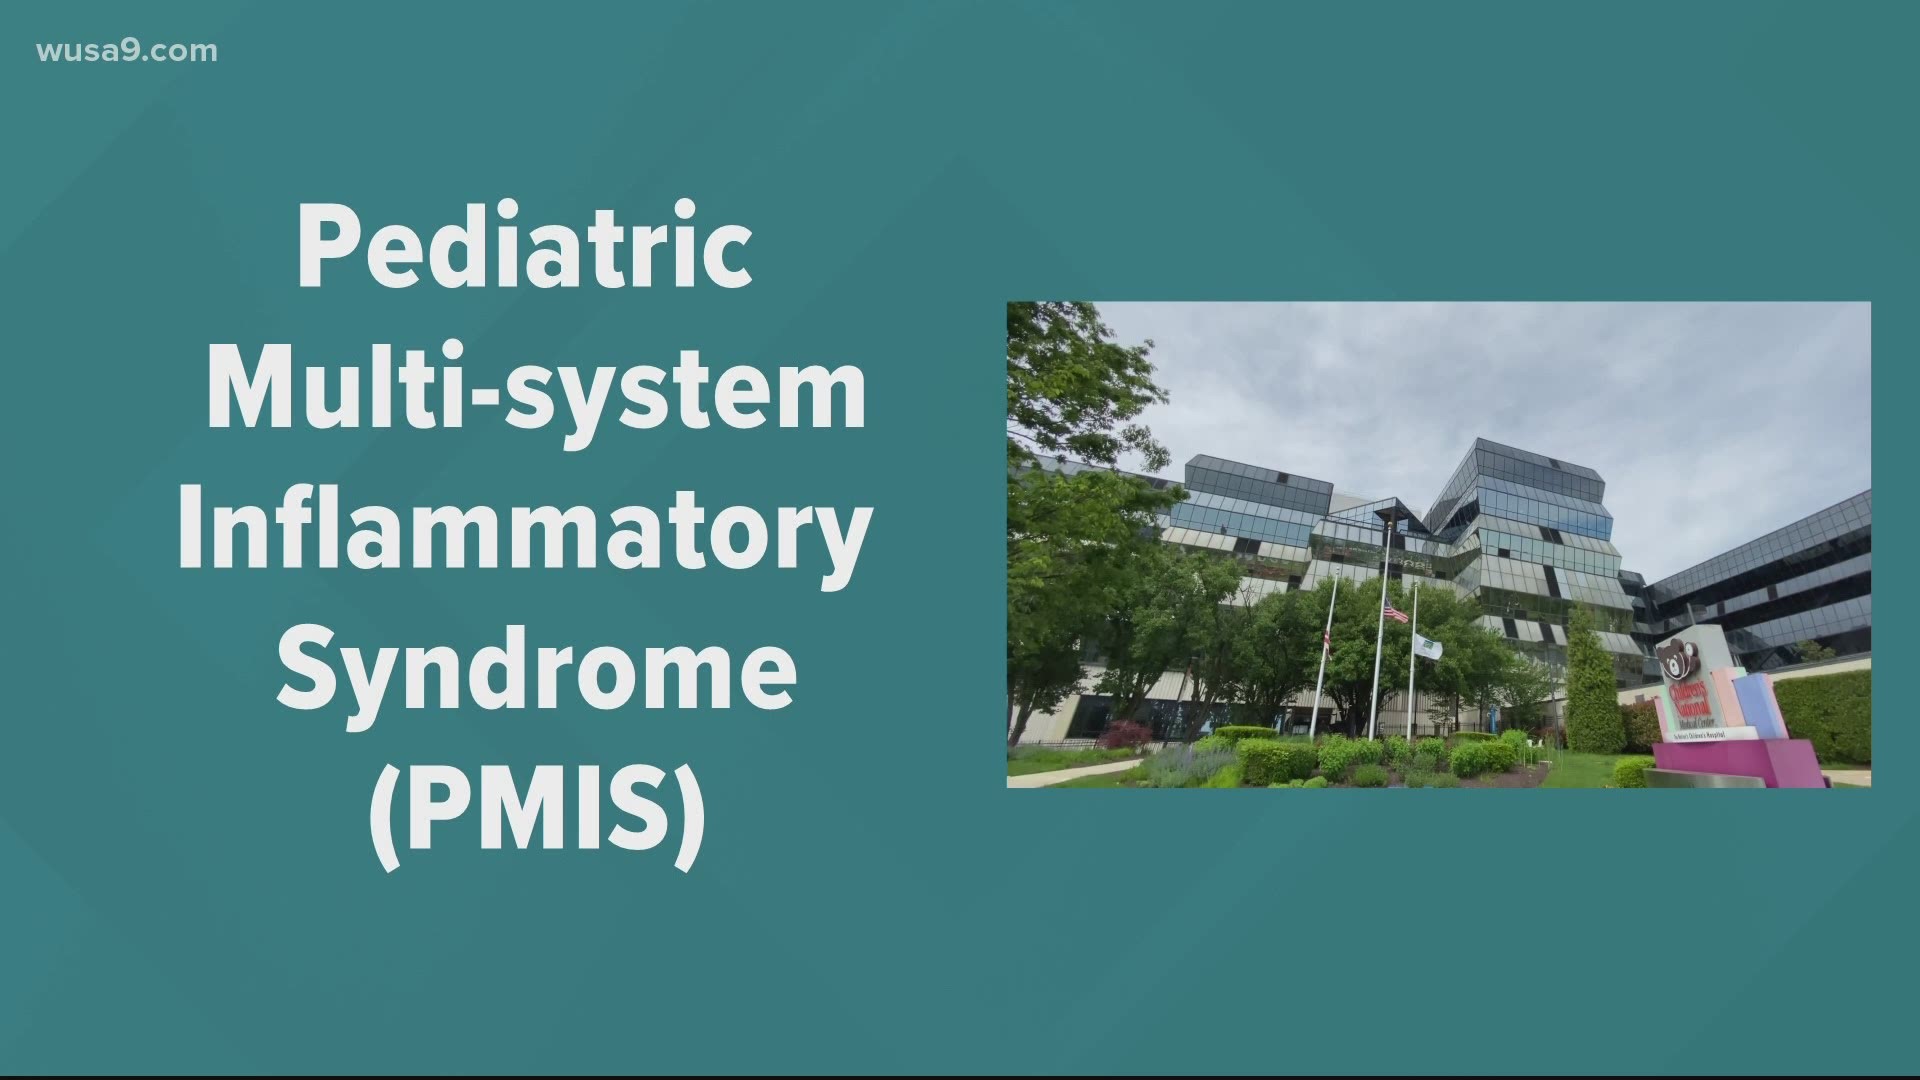 There are reported cases of children with PMIS at Children's National Hospital. Some doctors believe it may be linked to coronavirus.